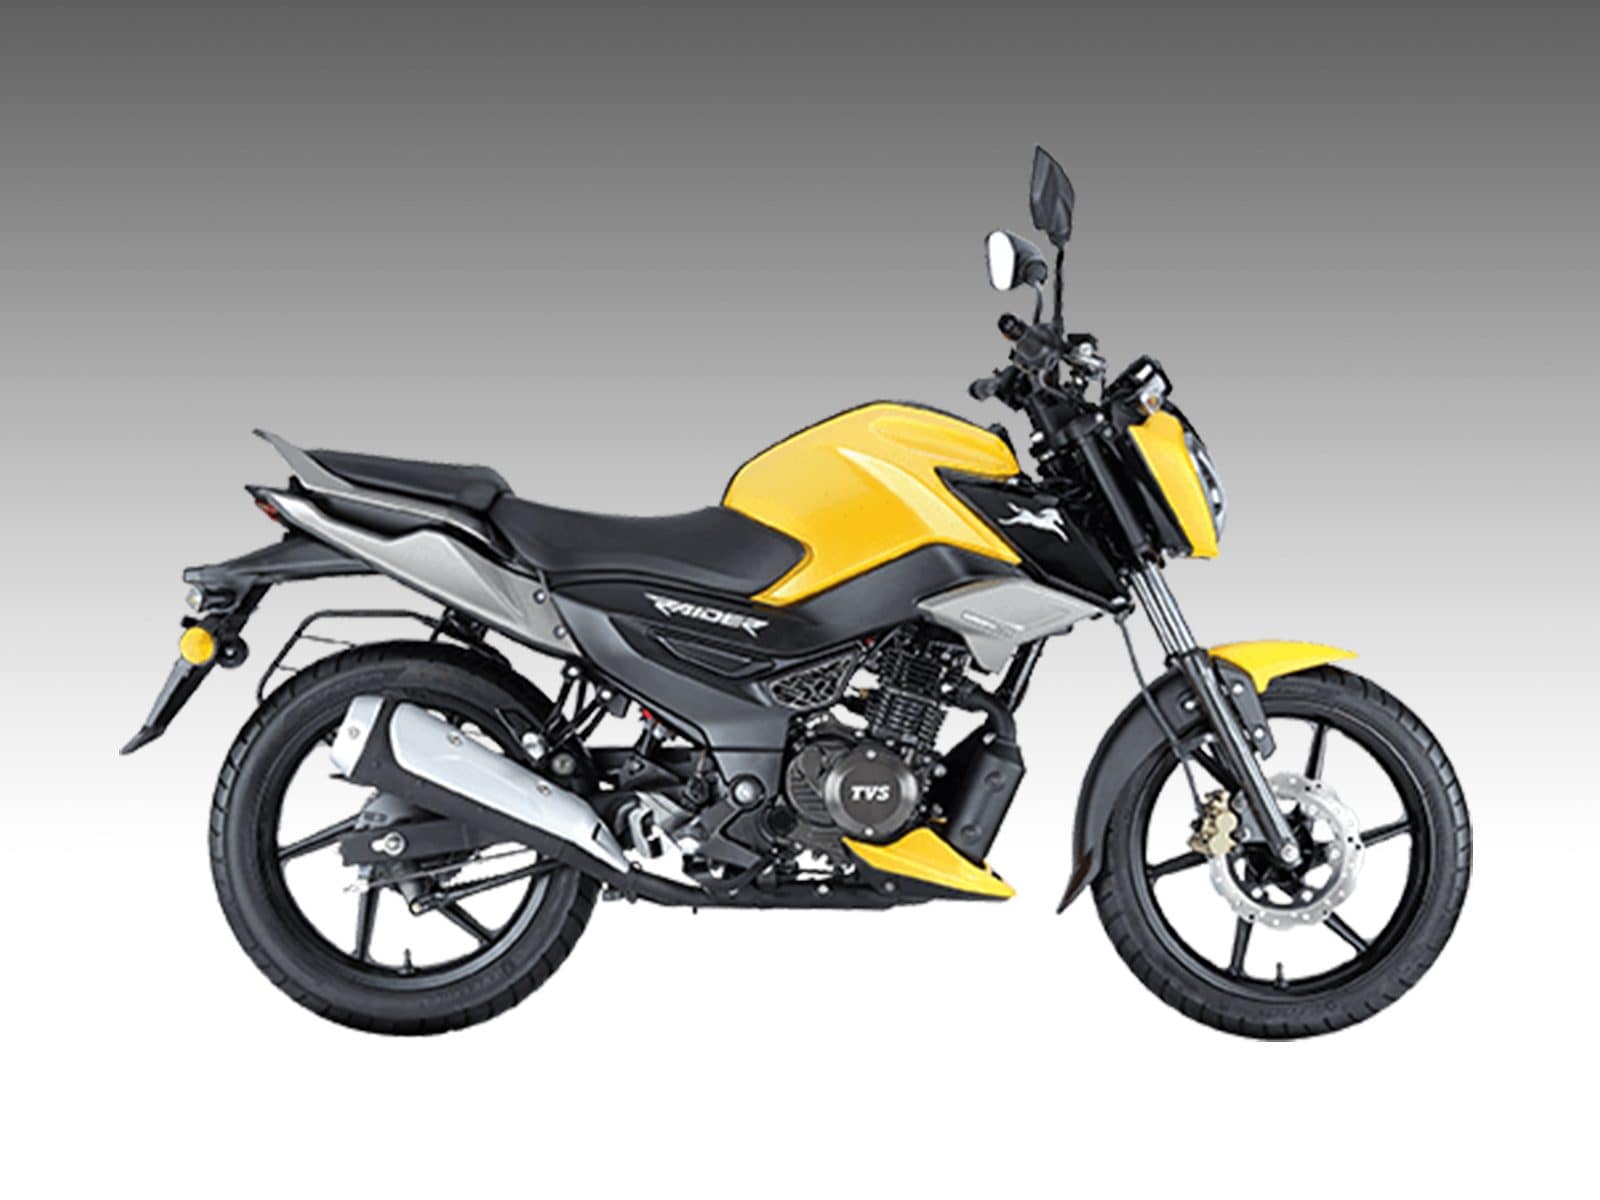 TVS Raider 125 2022: Price, Mileage, Features, Colours and More